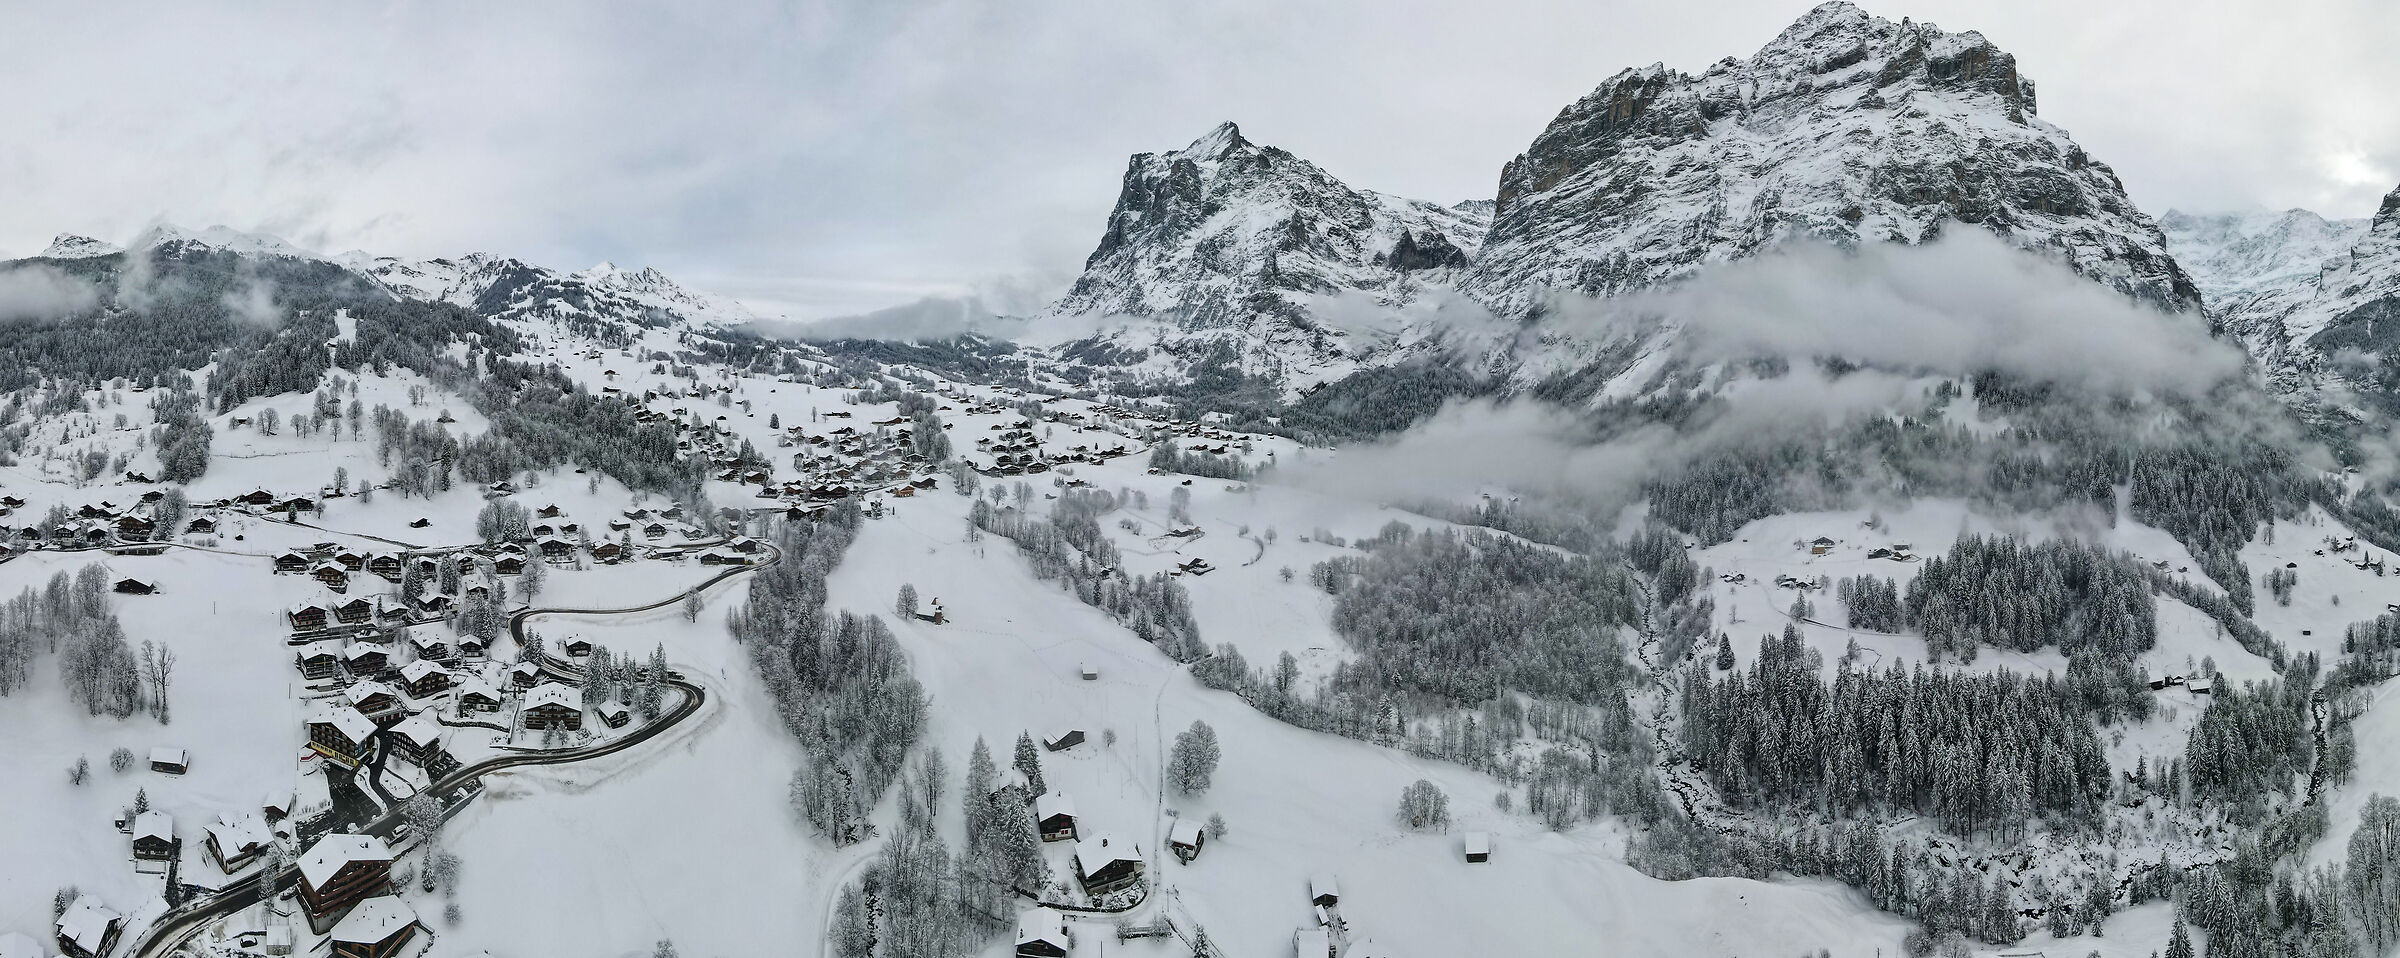 Grindelwald panorama under the snow...